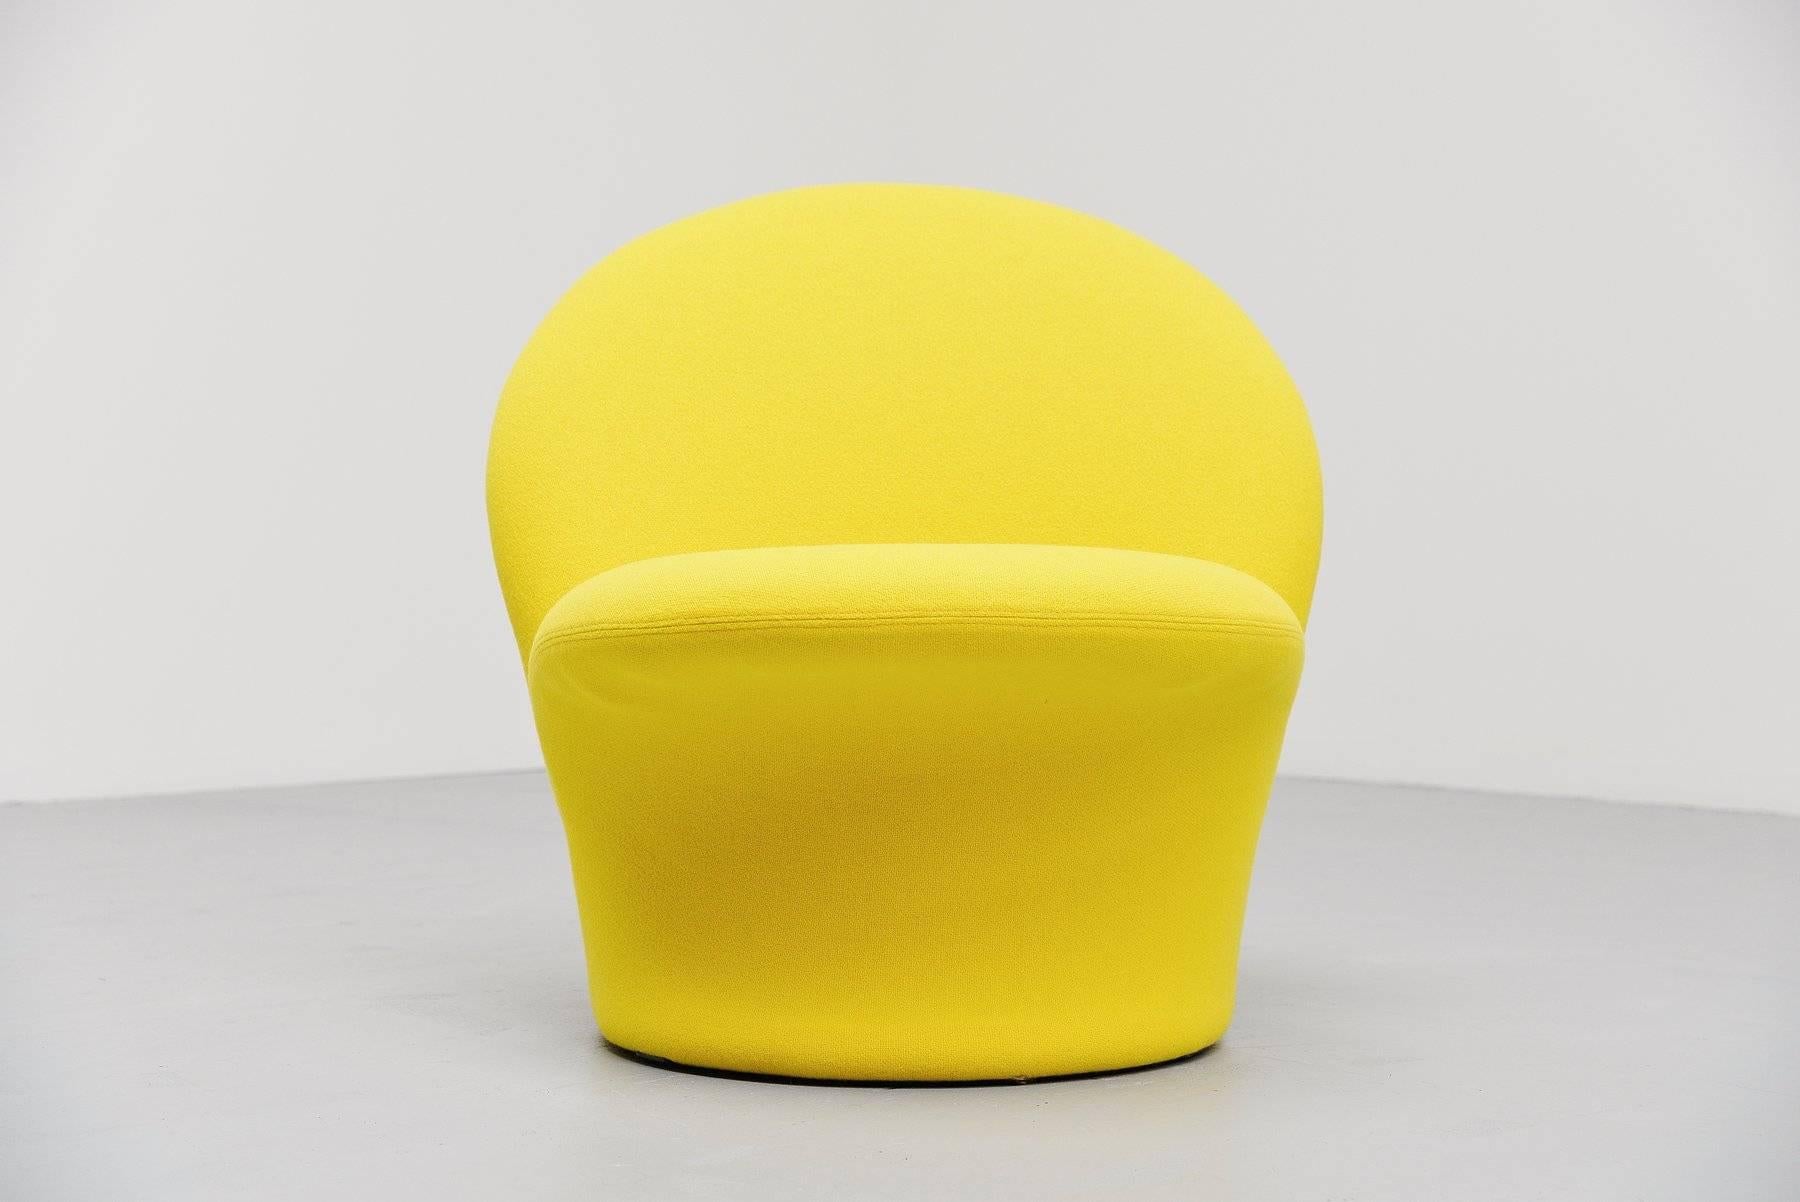 Super cool and special easy chair designed by Pierre Paulin (1927-2009) for Artifort in 1967. This rare chair was only produced for one year from 1967-1968 and is no longer in production now. Upholstered in yellow Tonus Kvadrat, original Artifort